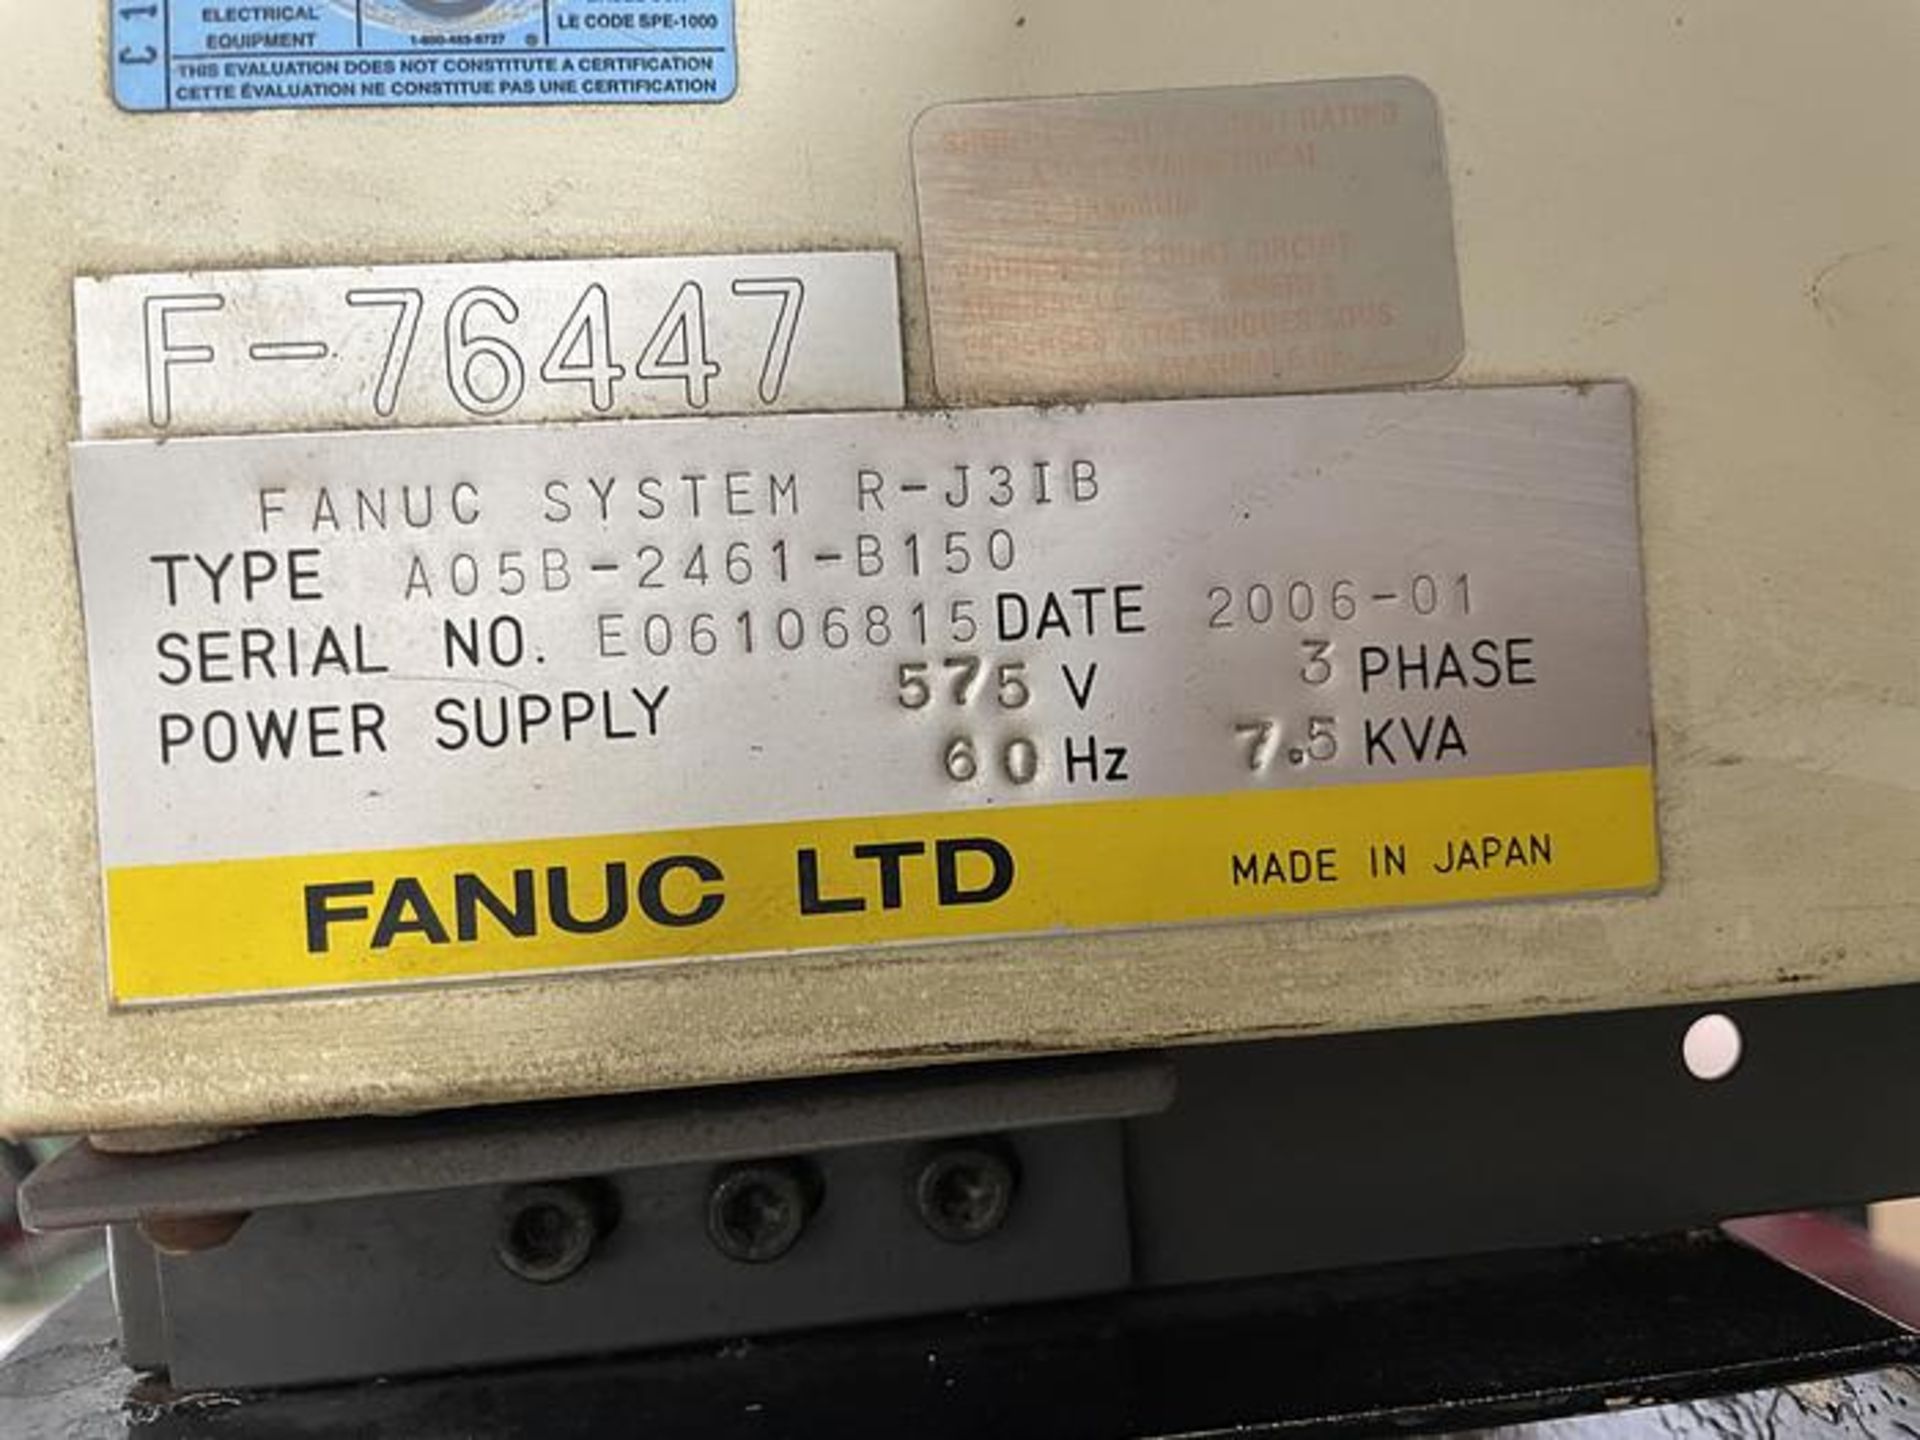 FANUC FANUC ARC MATE 120iB MIG WELDING CELL WITH LINCOLN 455M AND INDEX TABLE 5' X 8' - Image 11 of 20